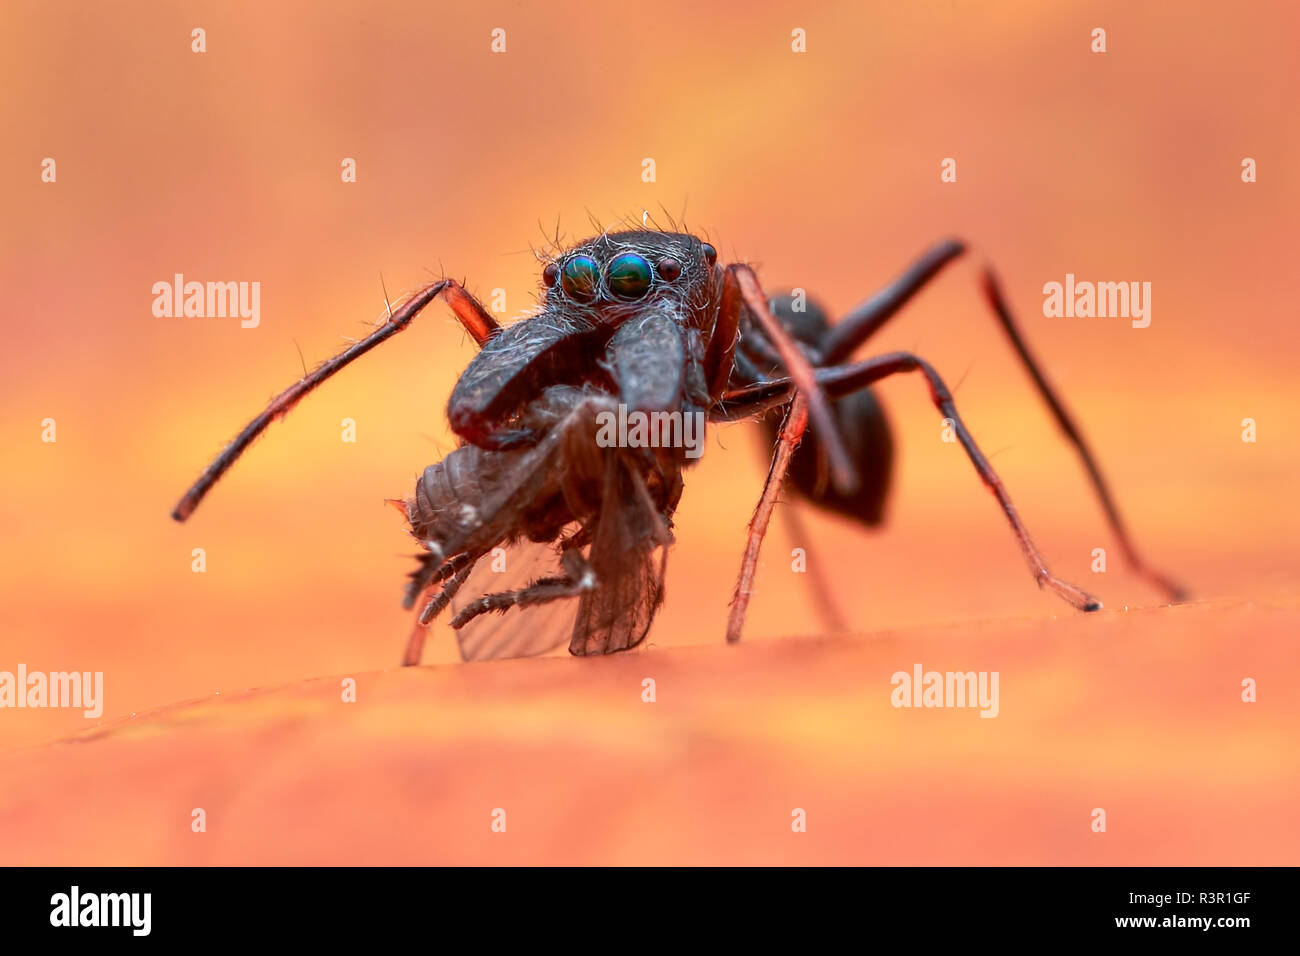 A male ant-mimicking jumping spider (Salticidae - Myrmarachne sp.) eating drain fly (Psychodidae). Stock Photo